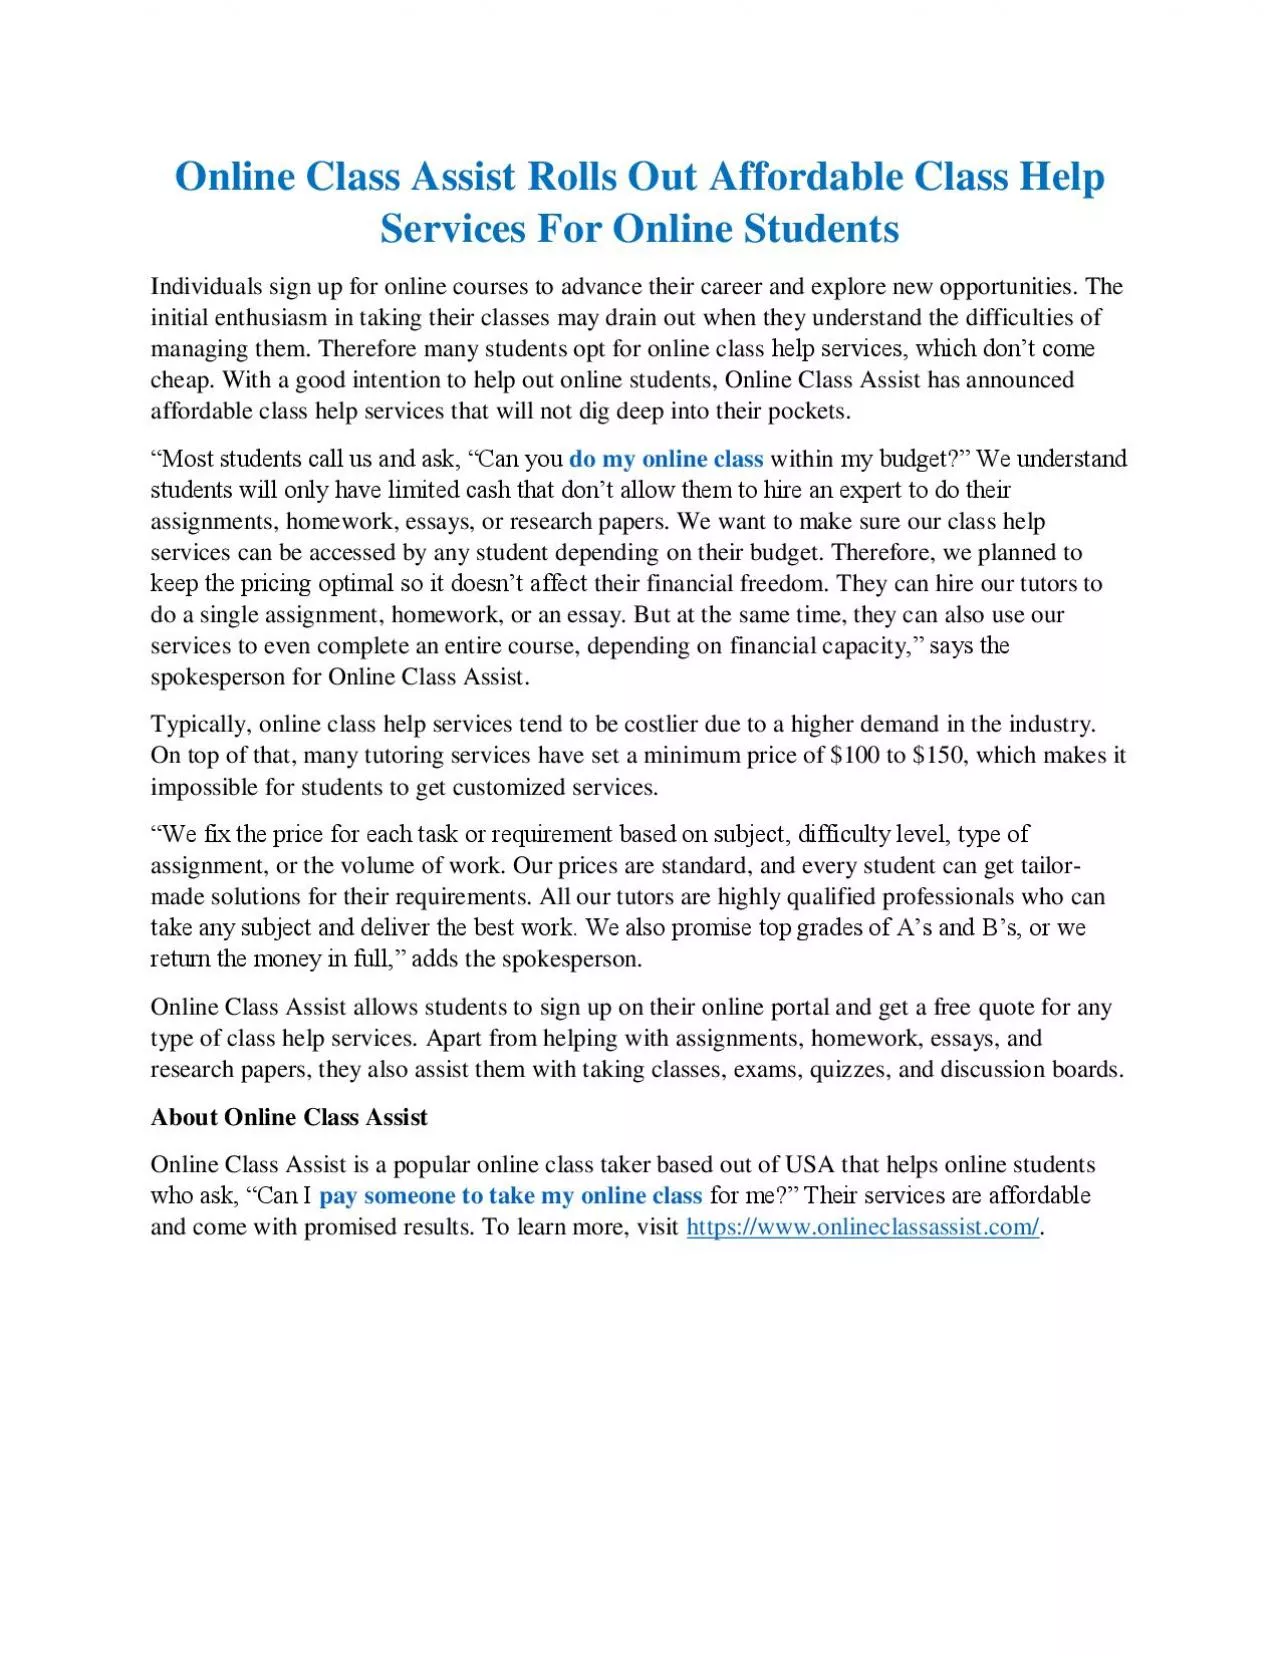 Online Class Assist Rolls Out Affordable Class Help Services For Online Students